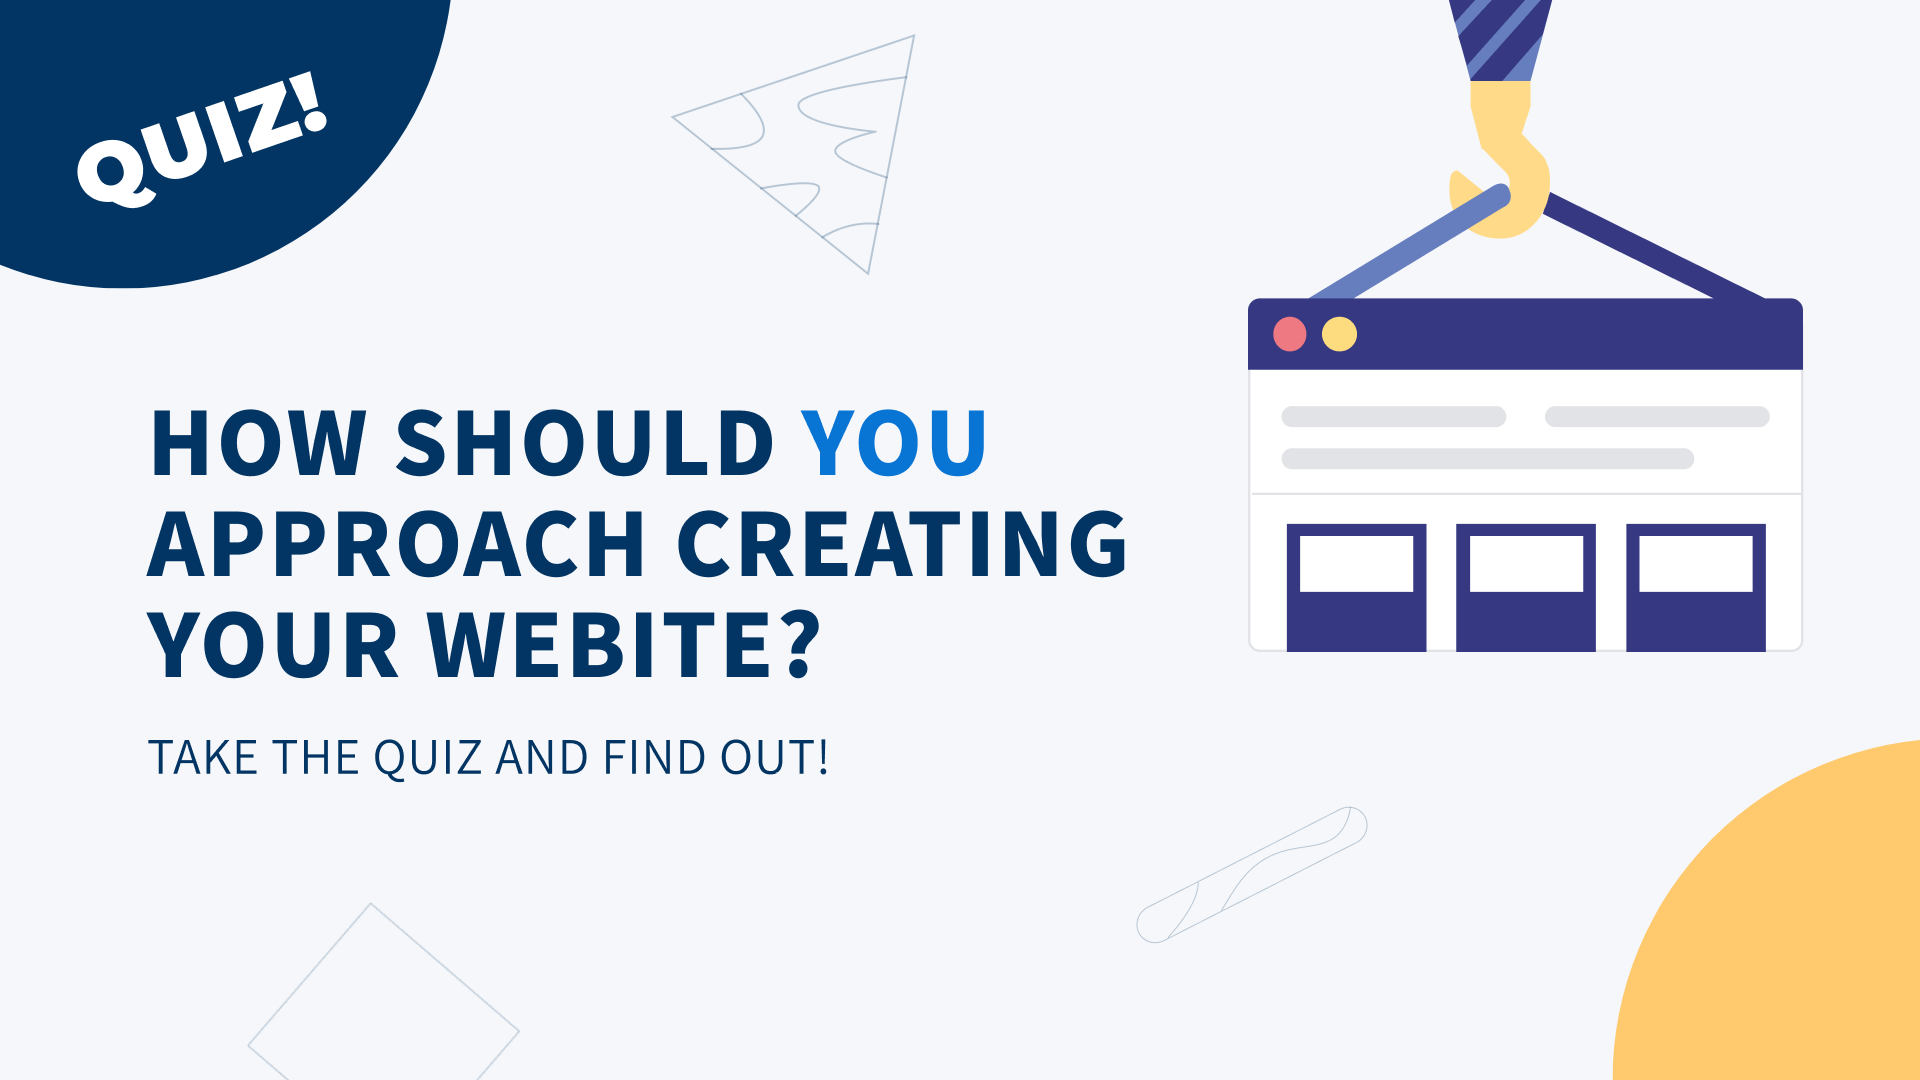 How should you approach creating your website? Take the quiz and find out!